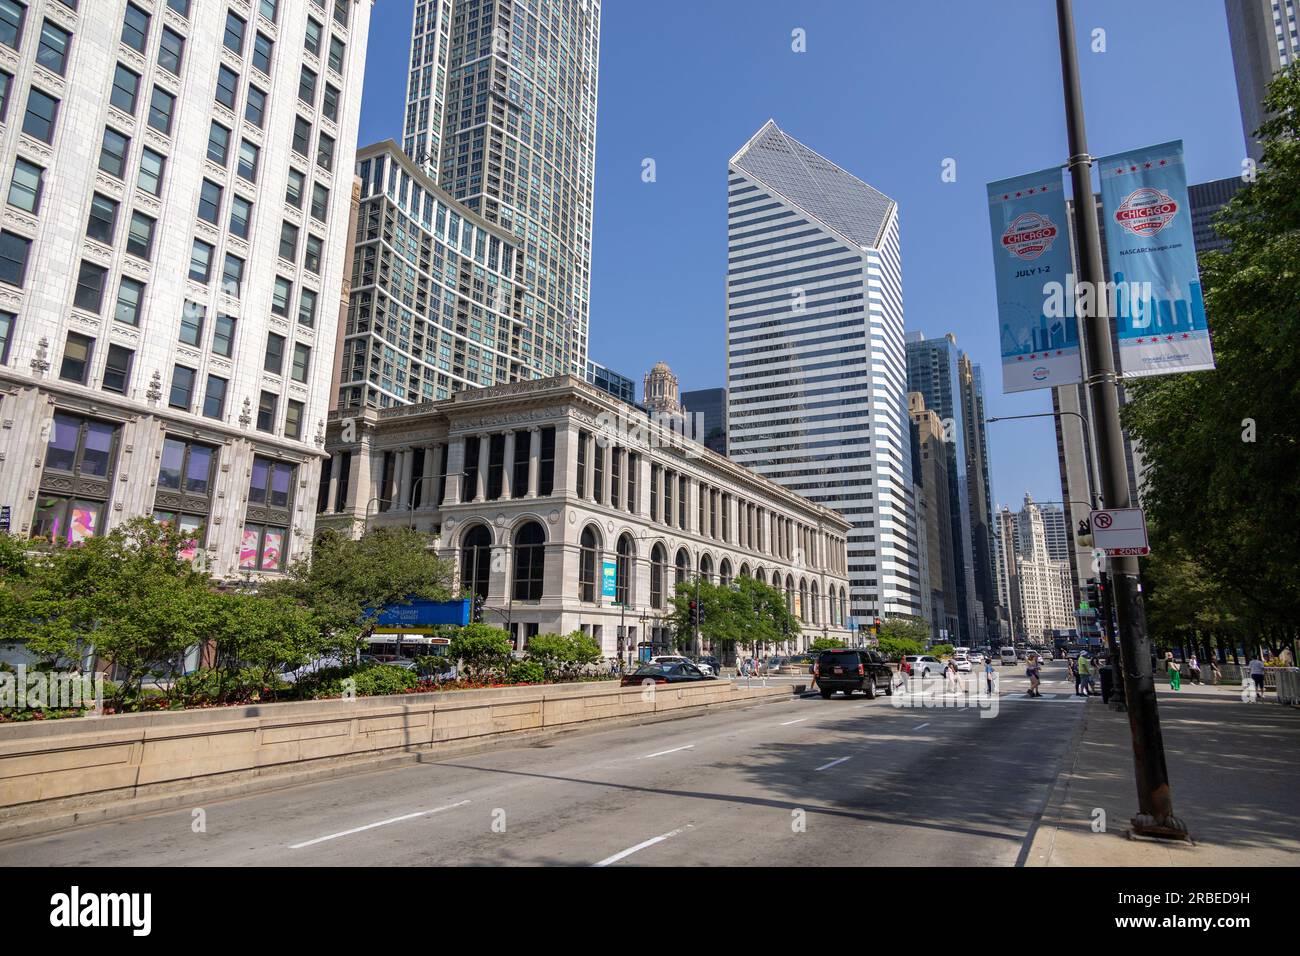 Buildings On South Michigan Ave In Chicago, Close To The Cloud Gate Sculpture At Millenium Park Stock Photo